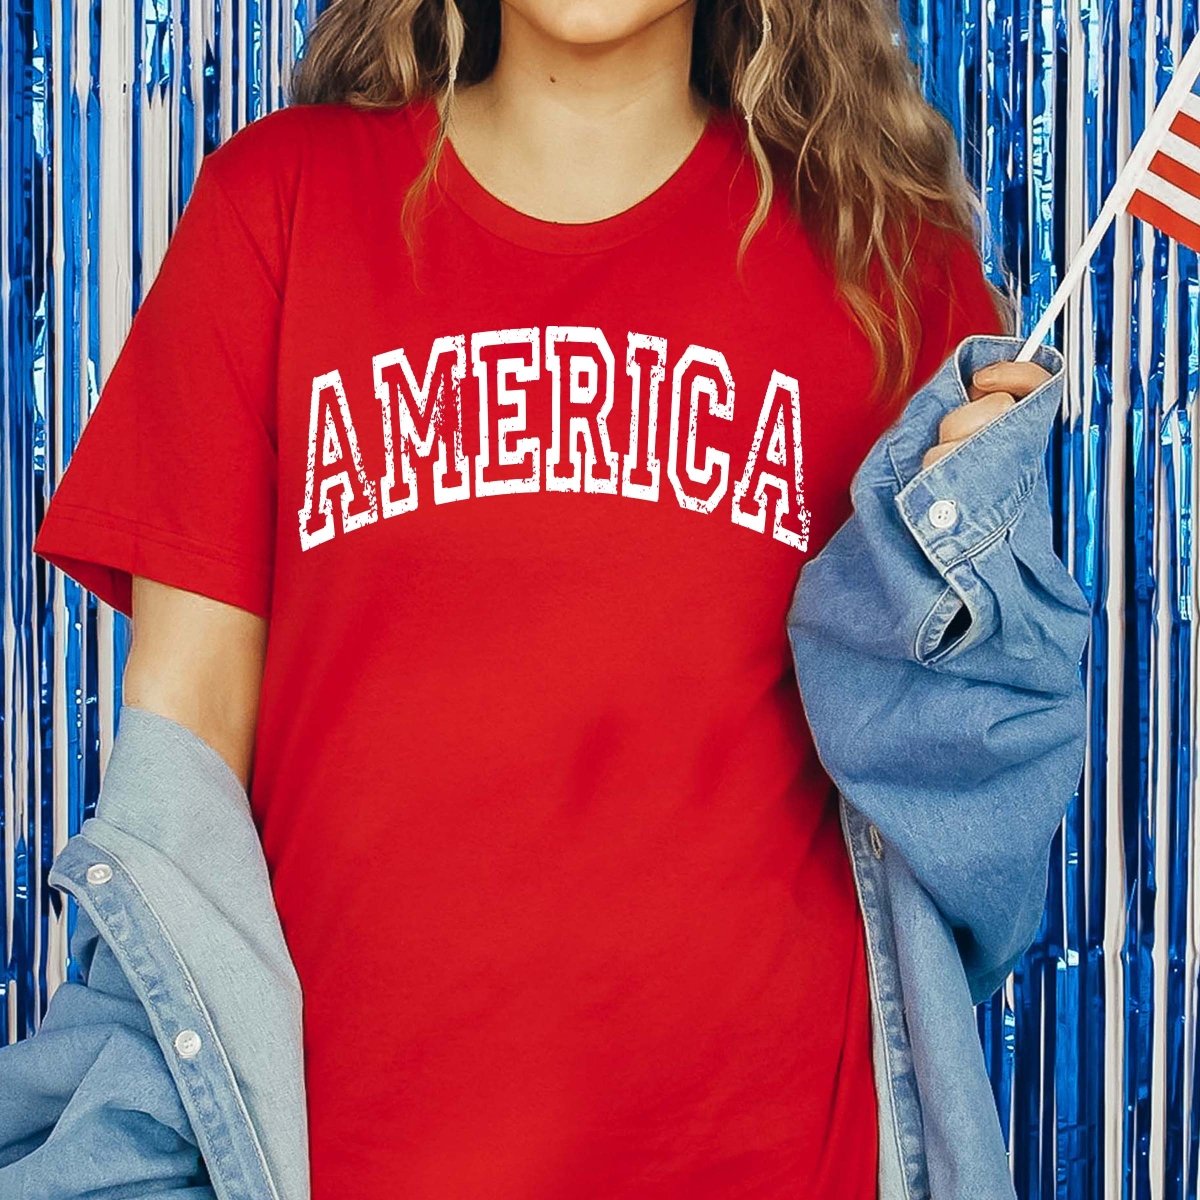 America Distressed Tee - Limeberry Designs